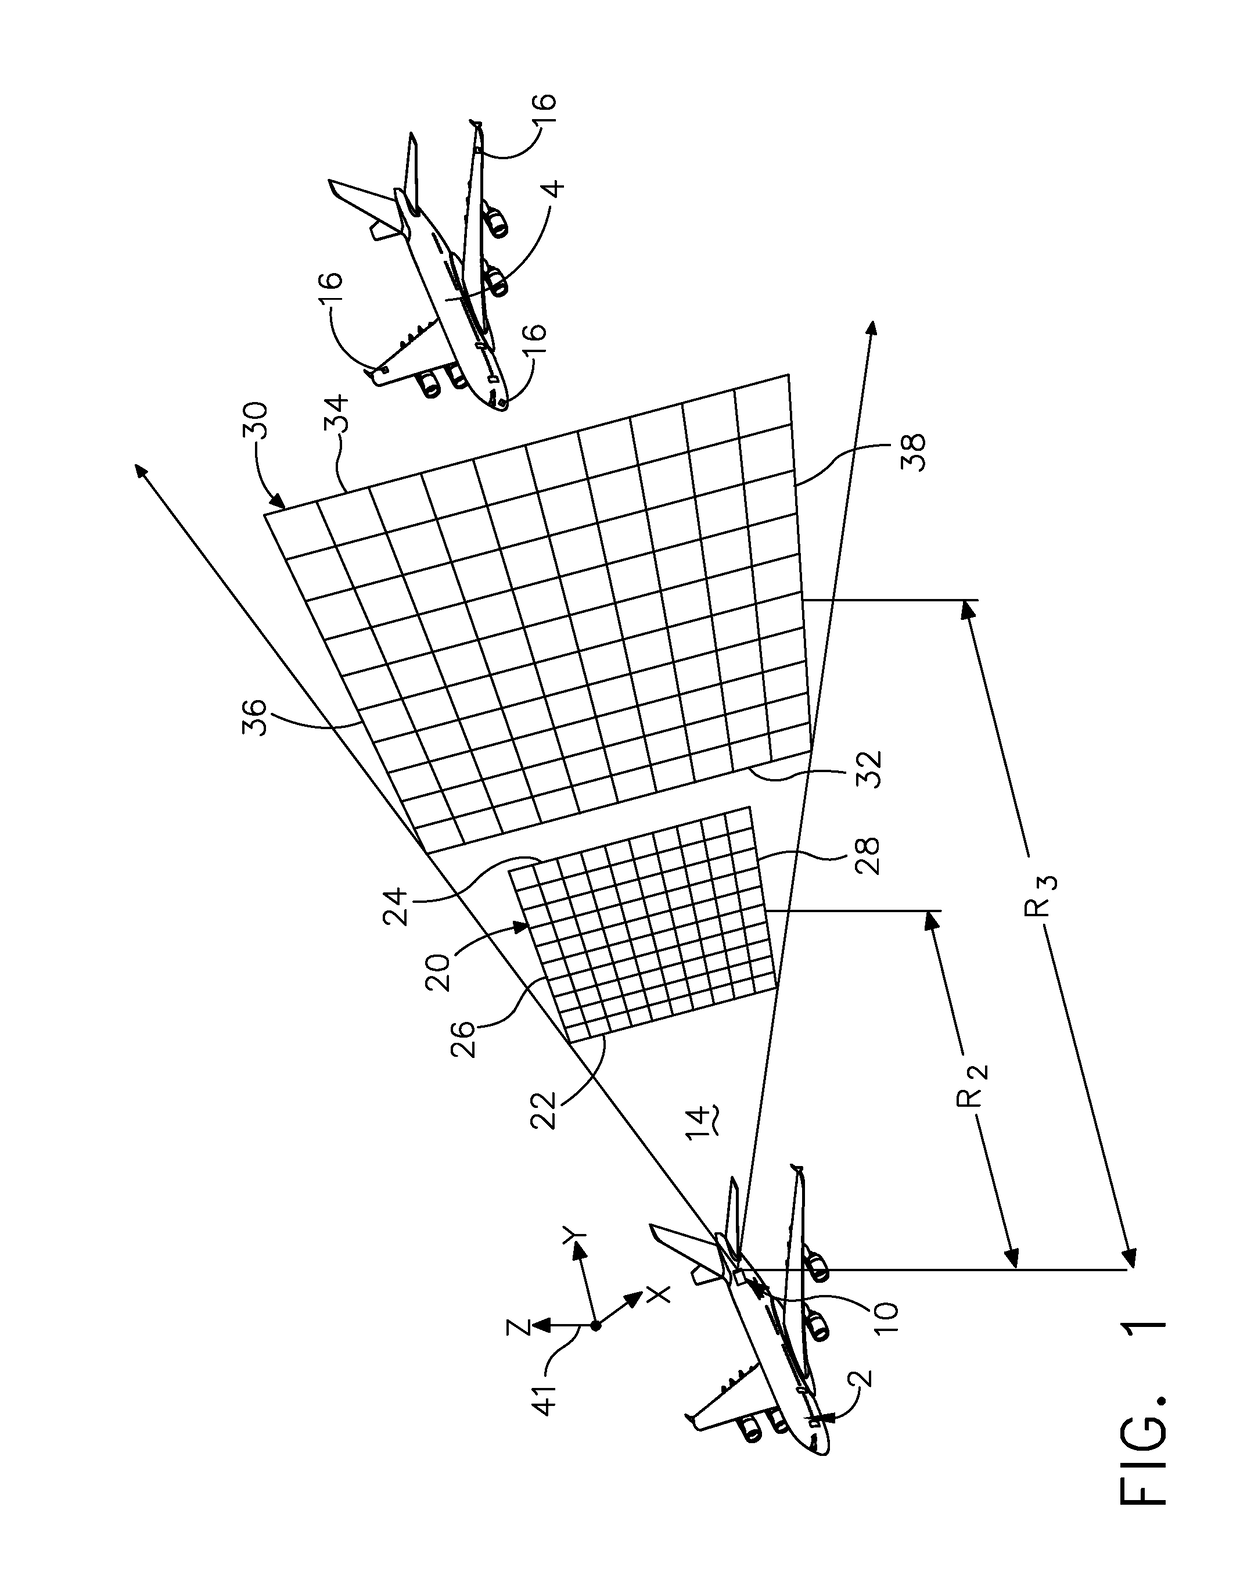 Method for flying at least two aircraft